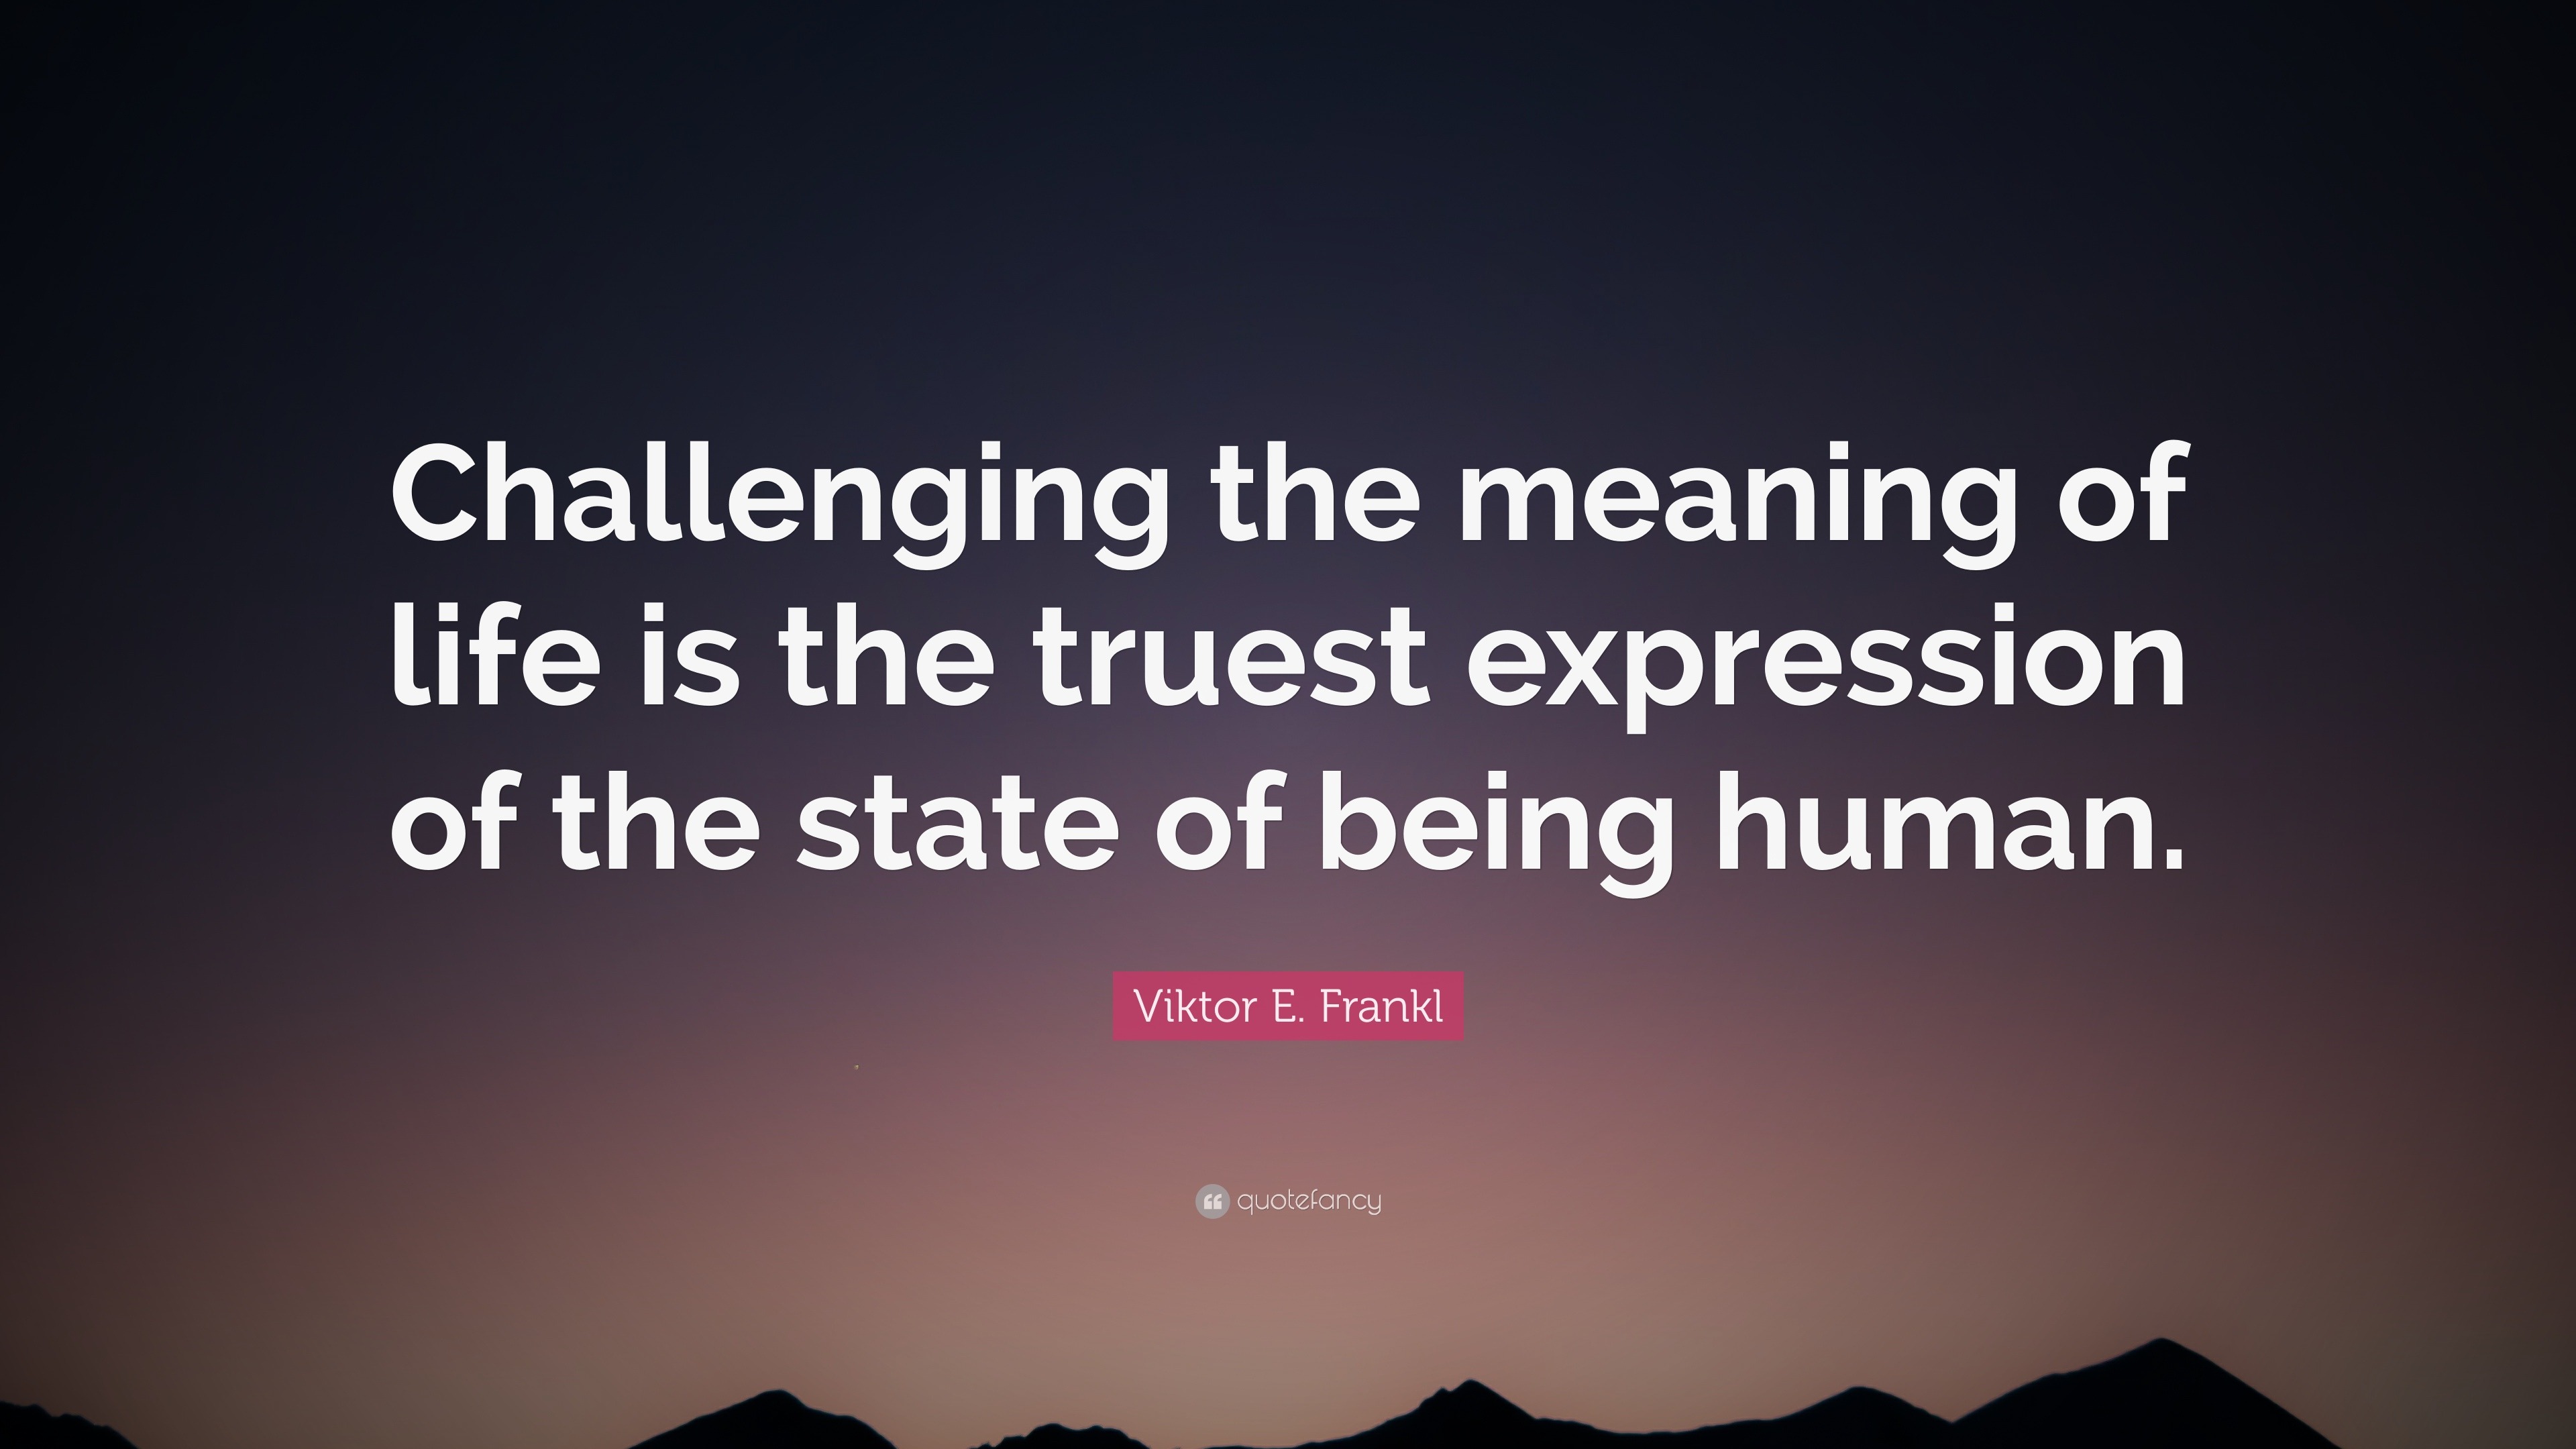 Viktor E Frankl Quote “Challenging the meaning of life is the truest expression